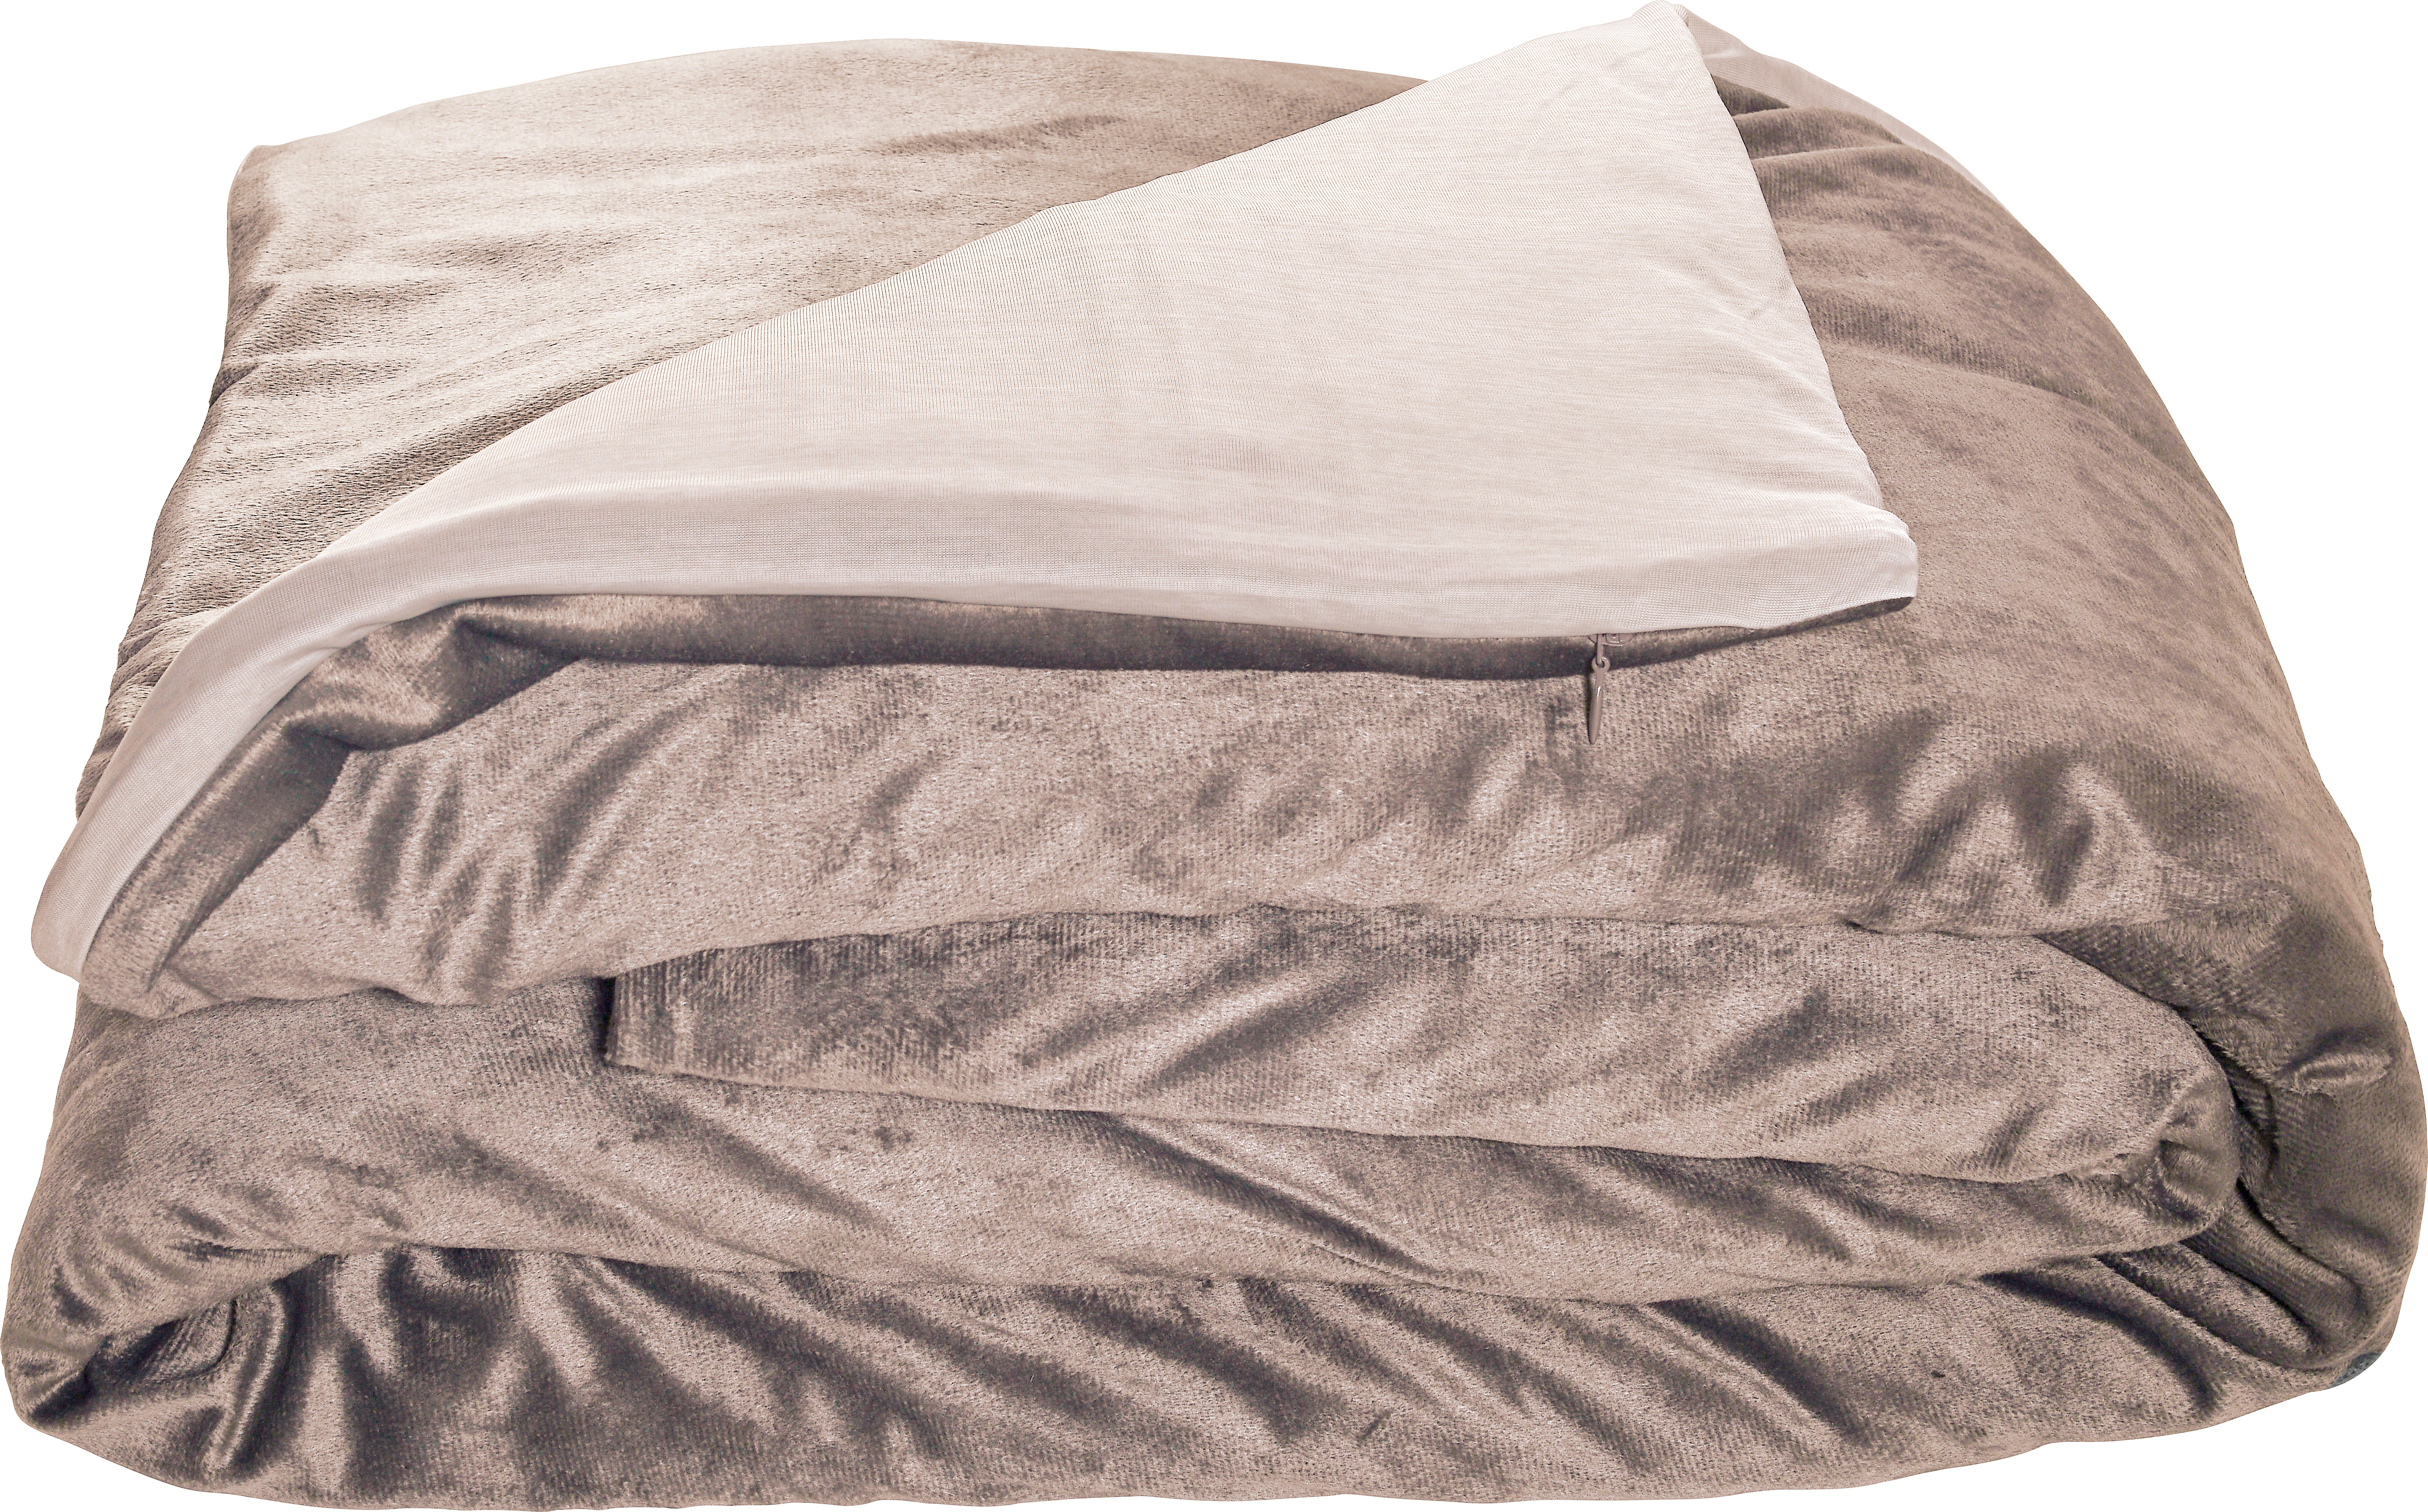 Tranquility Cool-to-the-Touch 15lb Weighted Blanket, Cuban Sand - image 5 of 5